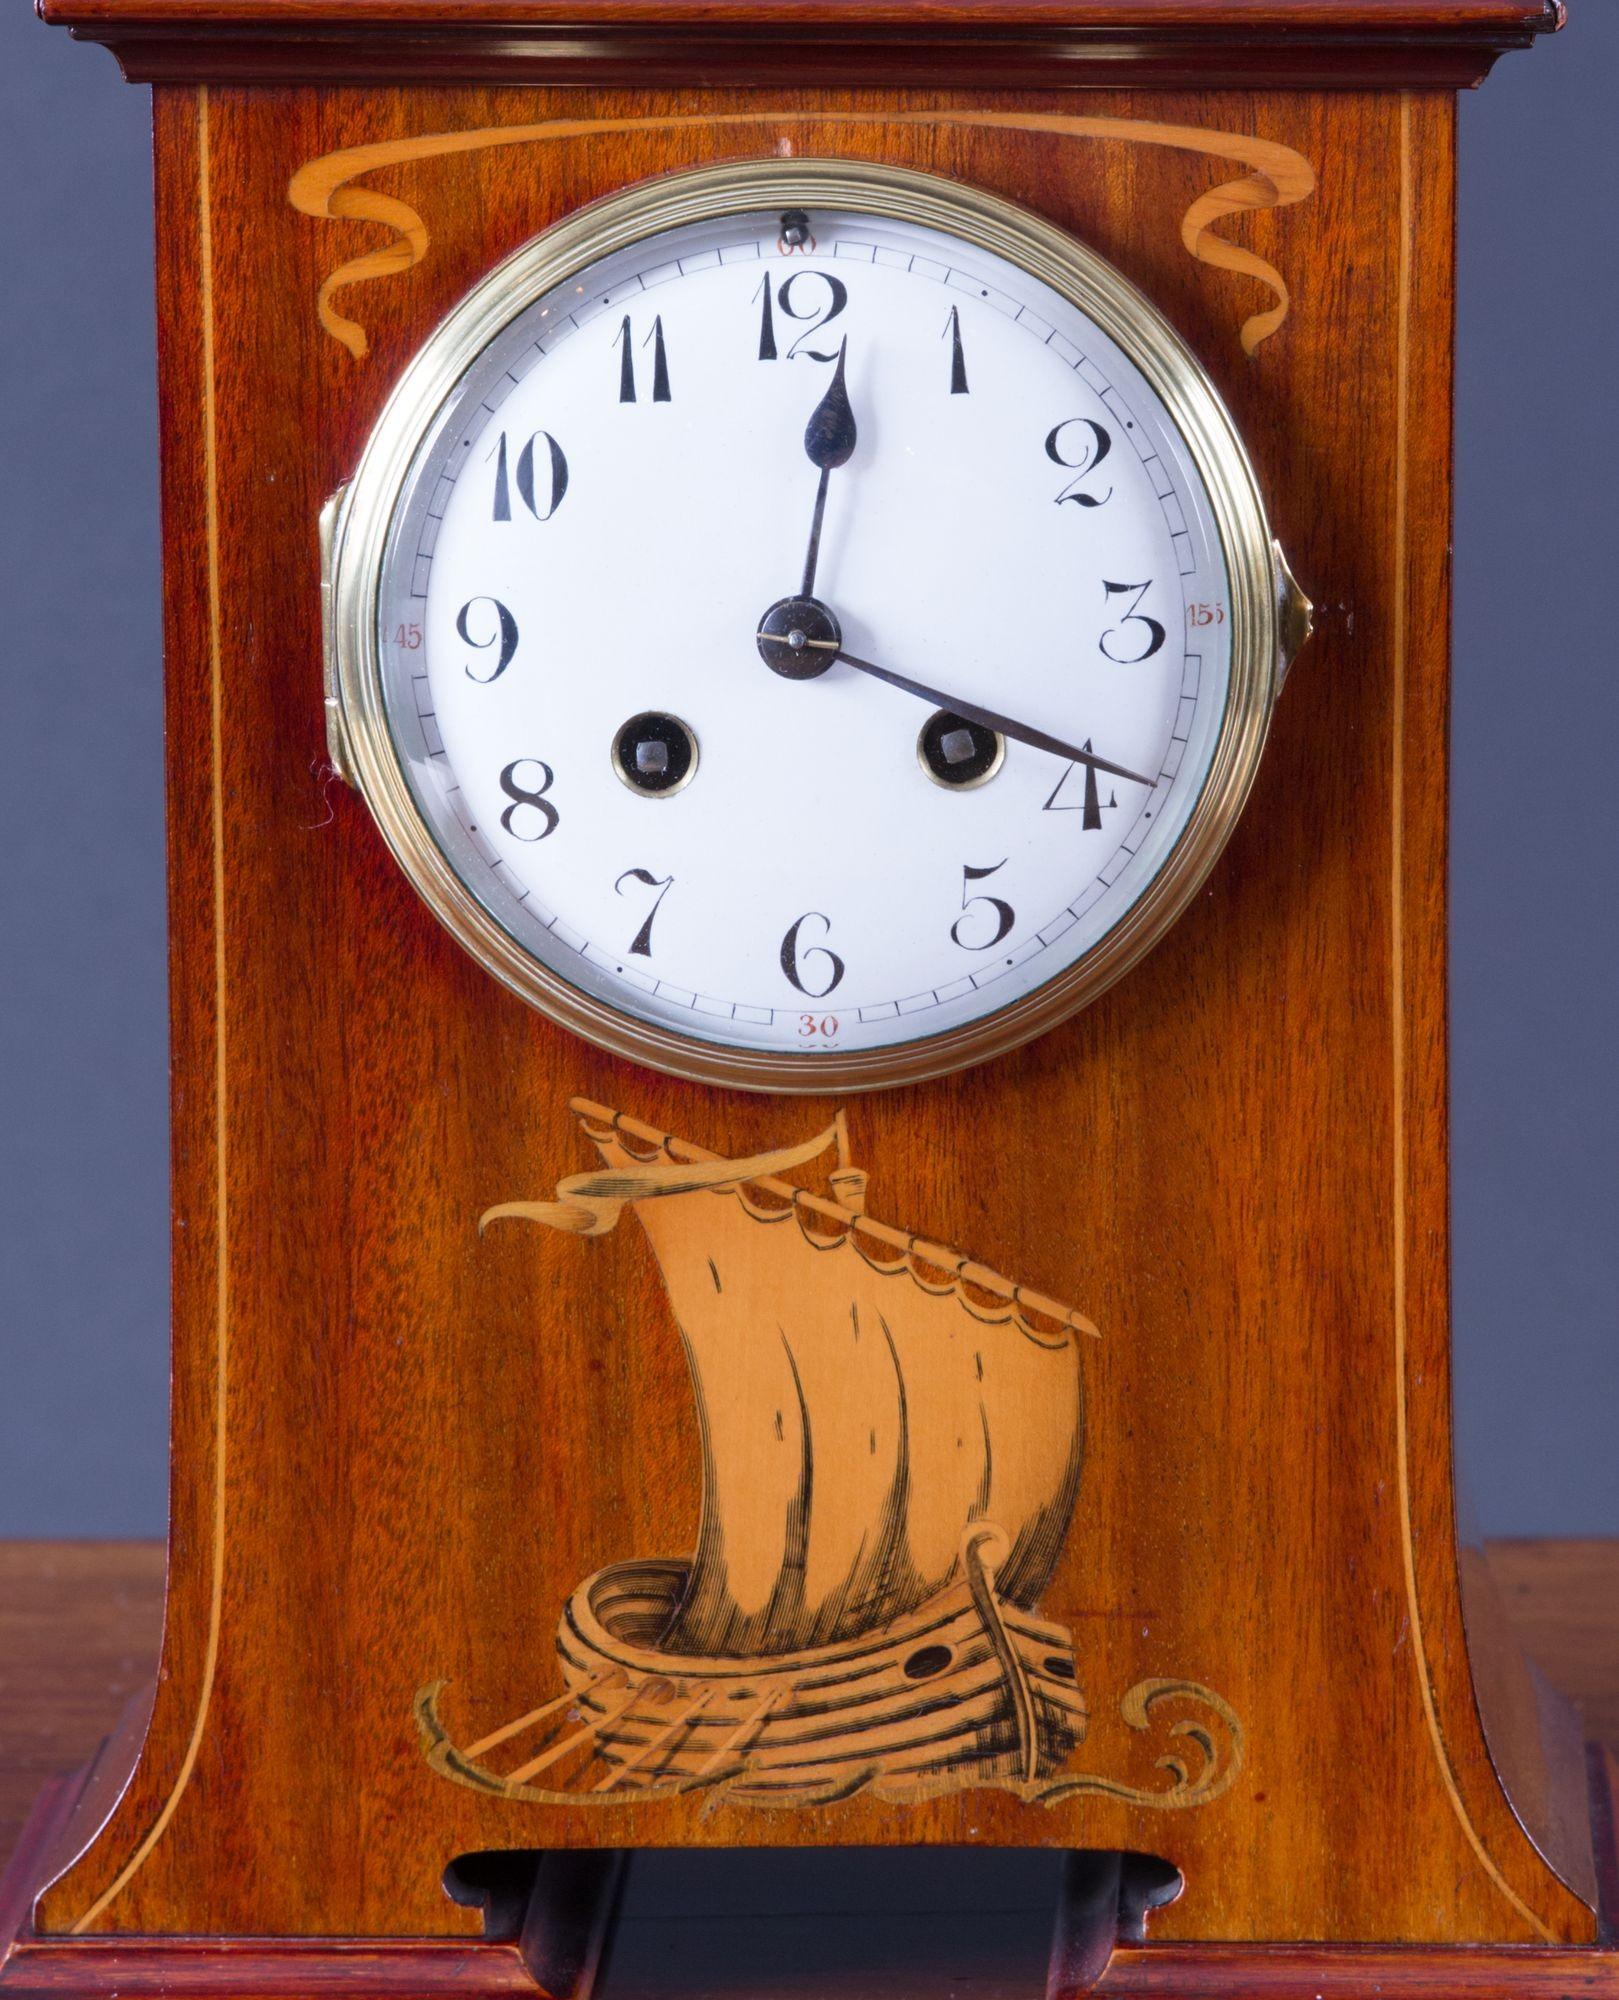 French Art Nouveau mahogany cased mantel clock with arch top above satinwood inlay depicting a Viking longboat at full sail.
Enamel dial with Arabic numerals. Eight day movement signed ‘Couillet Freres’ striking the hours and halves on a coiled